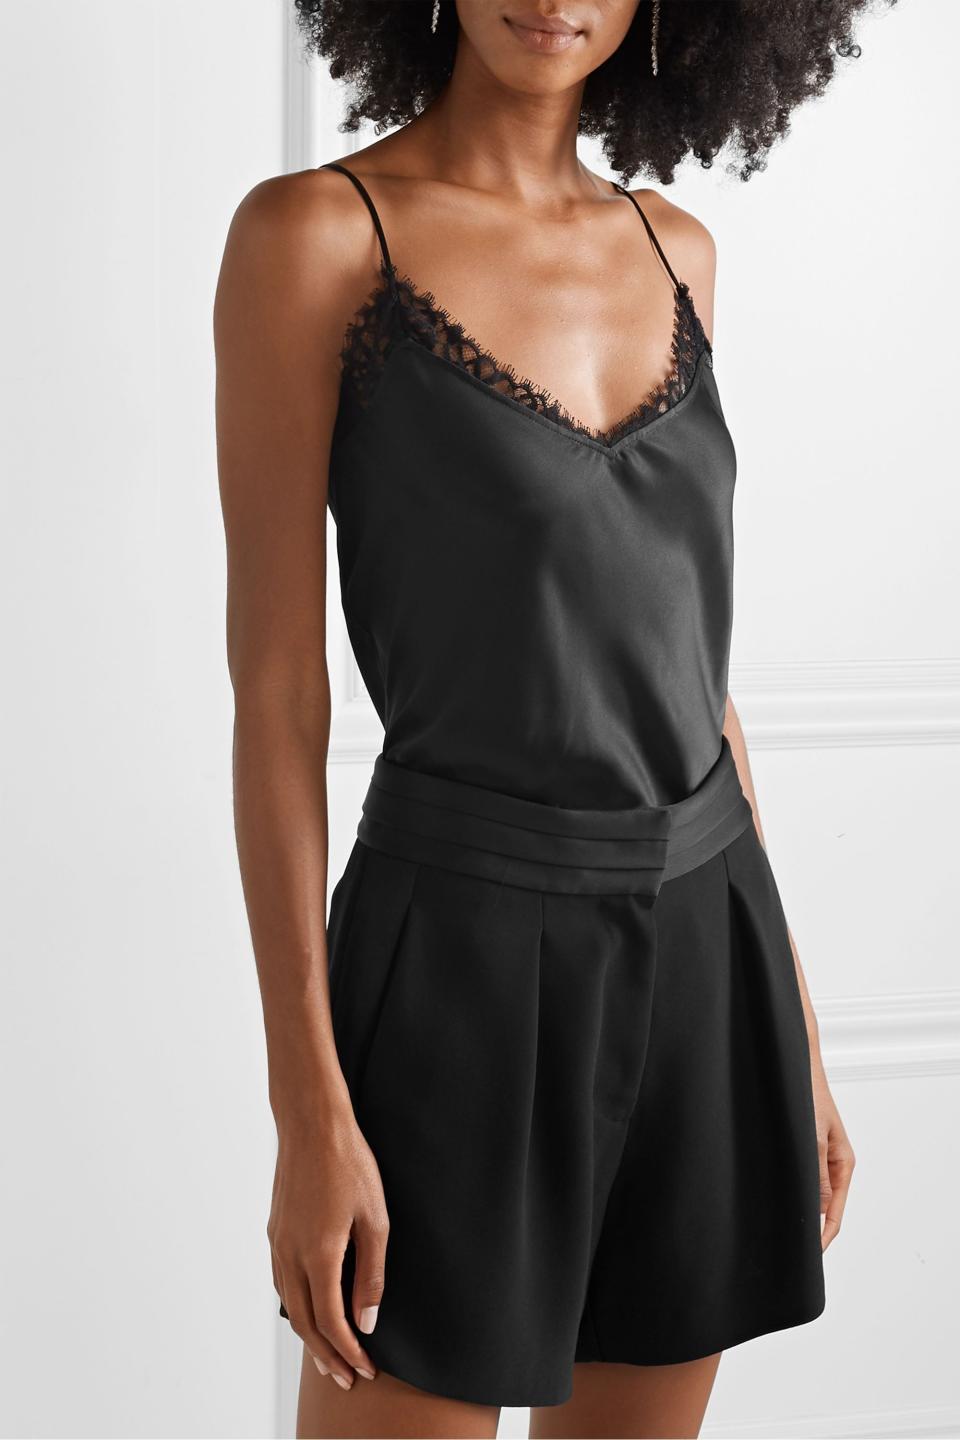 8) Lace-Trimmed Camisole